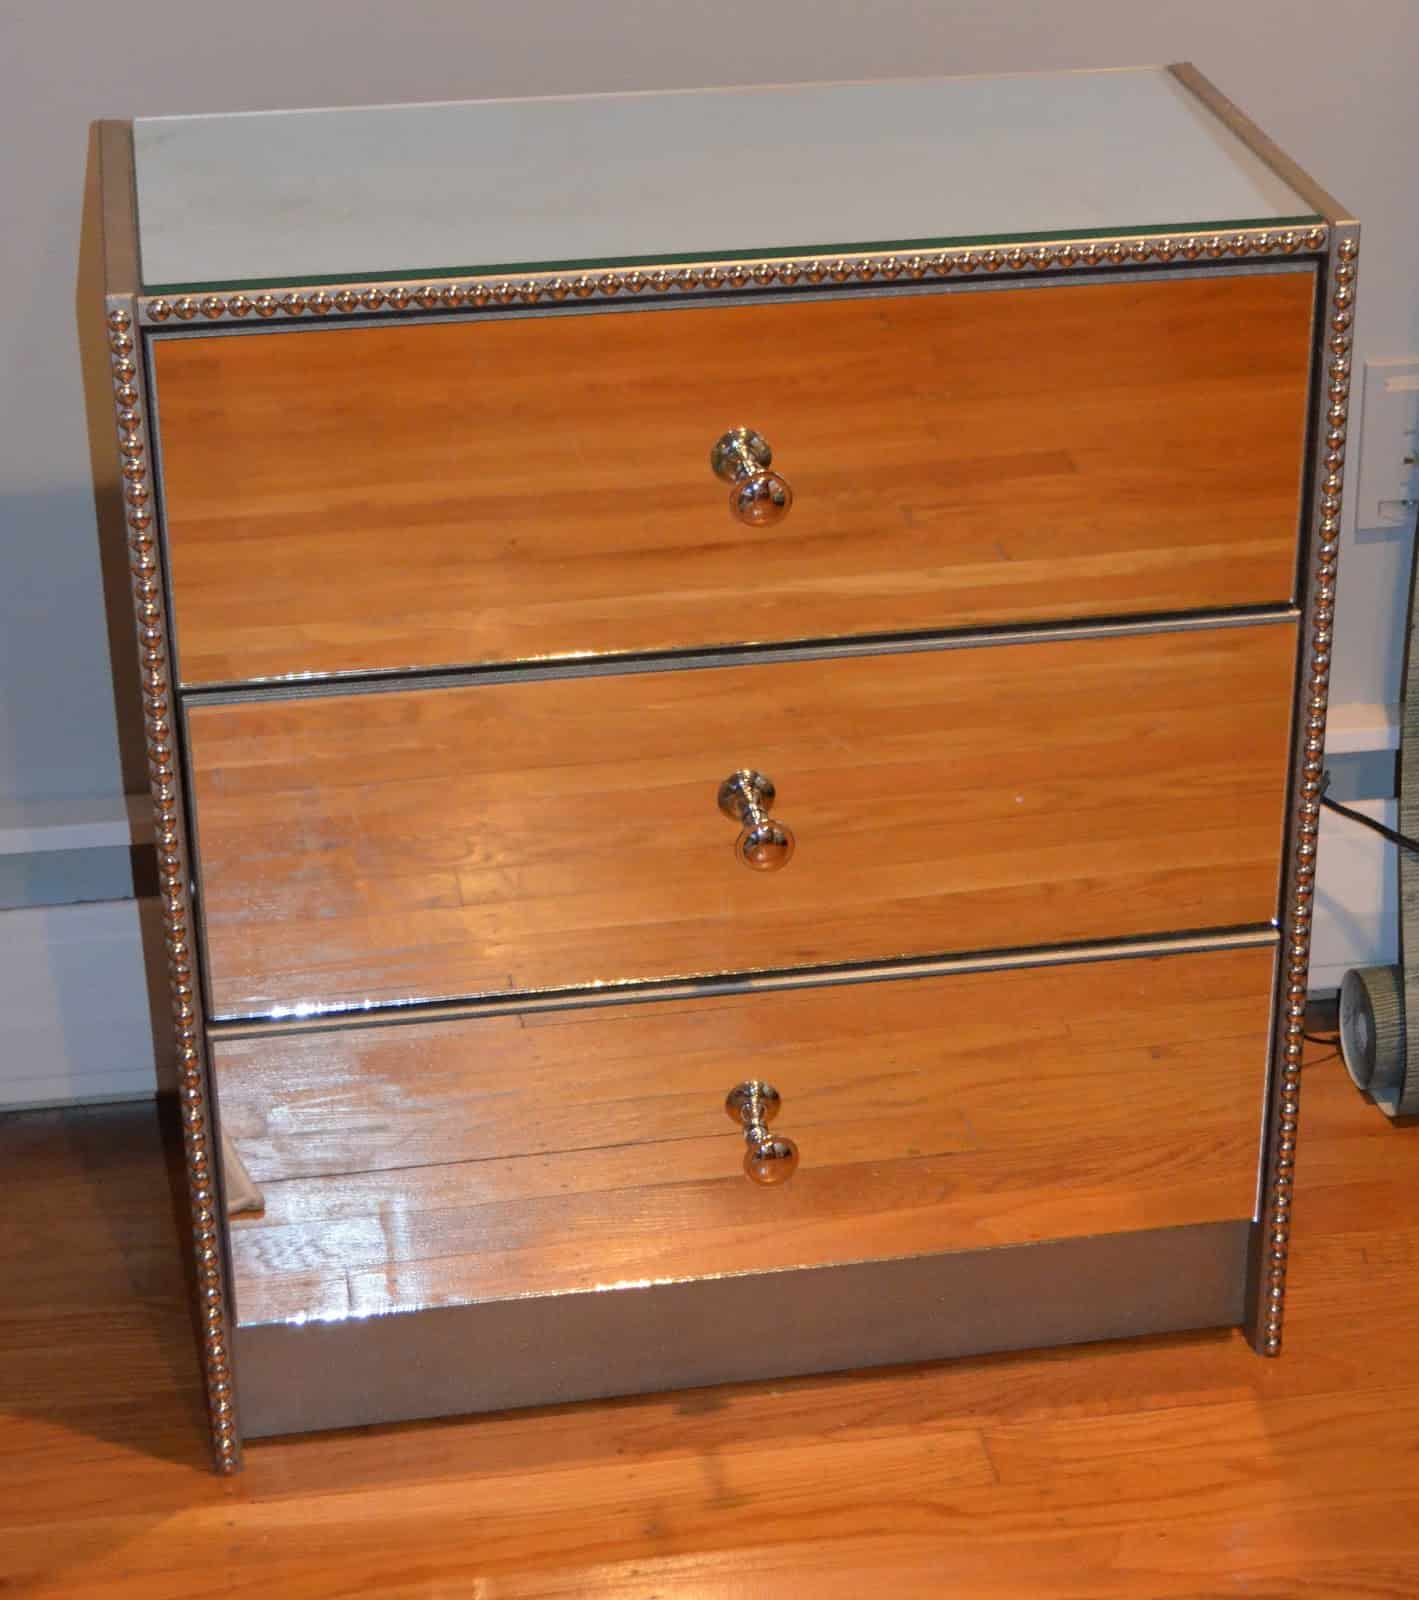 Diy Dressers Plans To Build A, Diy Mirrored Dresser Drawers